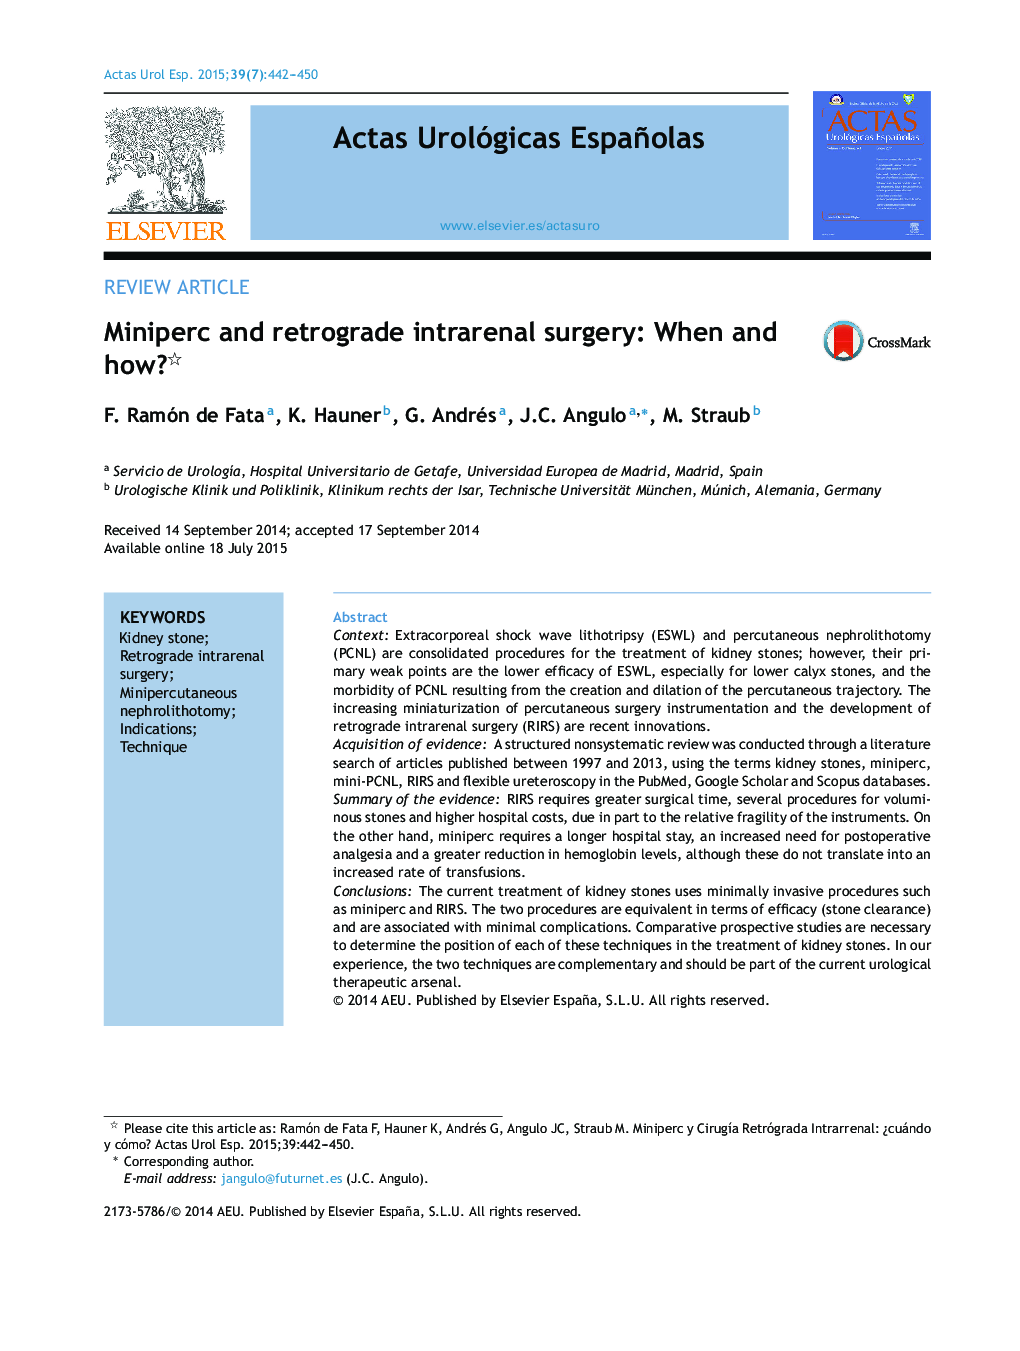 Miniperc and retrograde intrarenal surgery: When and how?